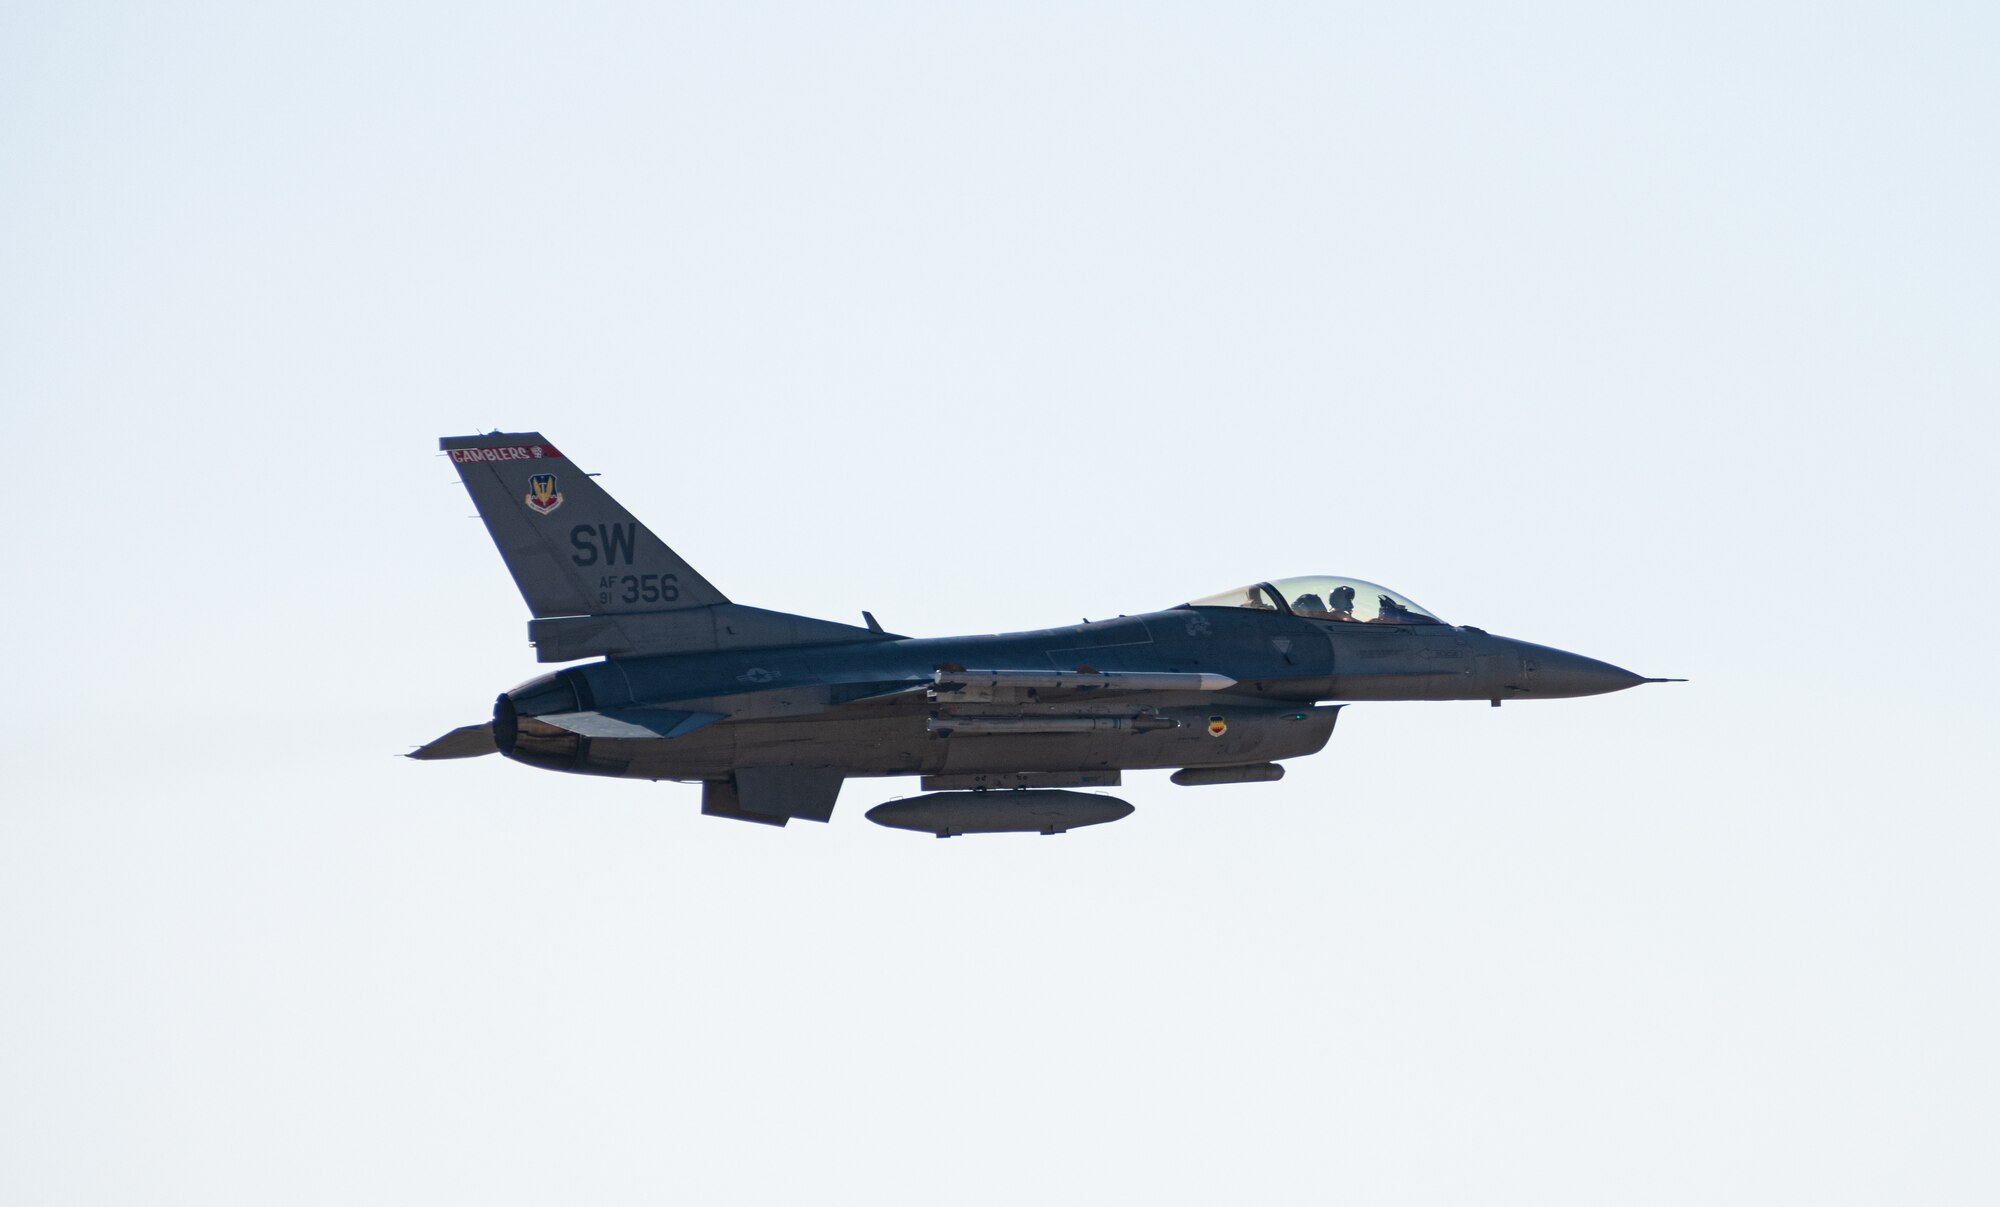 An F-16C Fighting Falcon, assigned to the 77th Expeditionary Fighter Squadron, takes off Dec. 1, 2020, at King Faisal Air Base, Kingdom of Saudi Arabia.